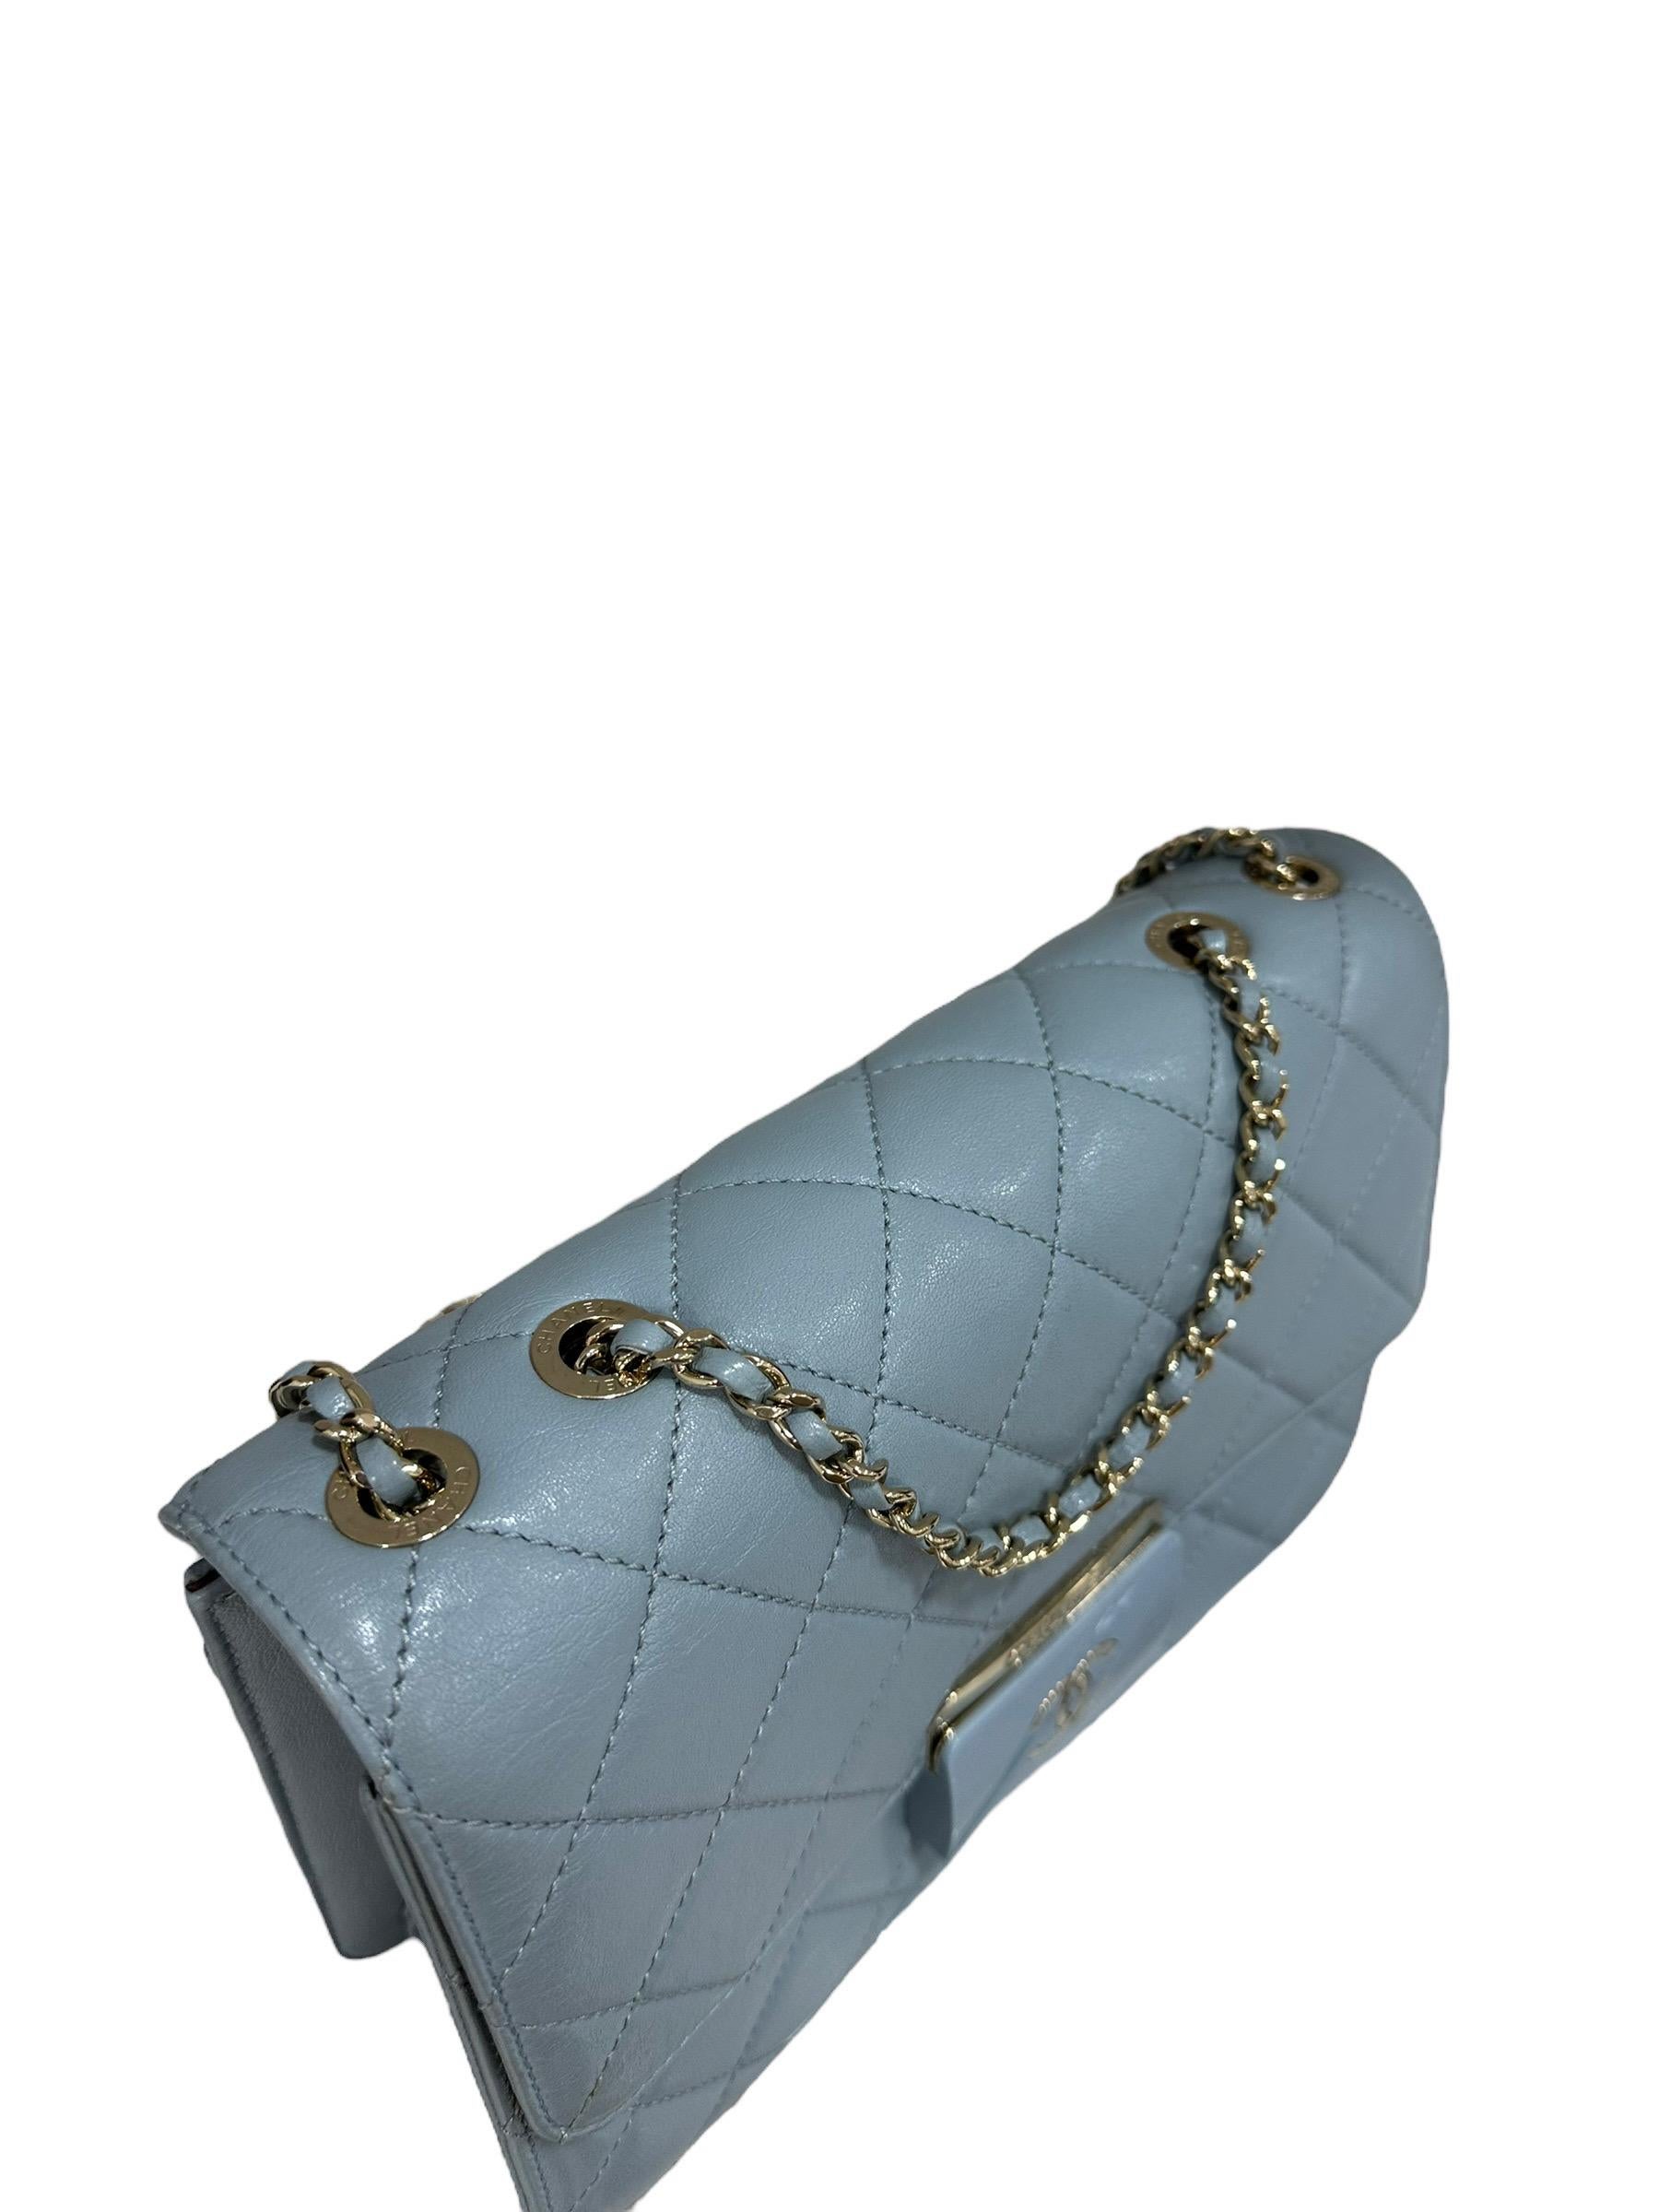  Borsa A Tracolla Chanel Timeless Chic Azzurra 2016/2017 Pour femmes 